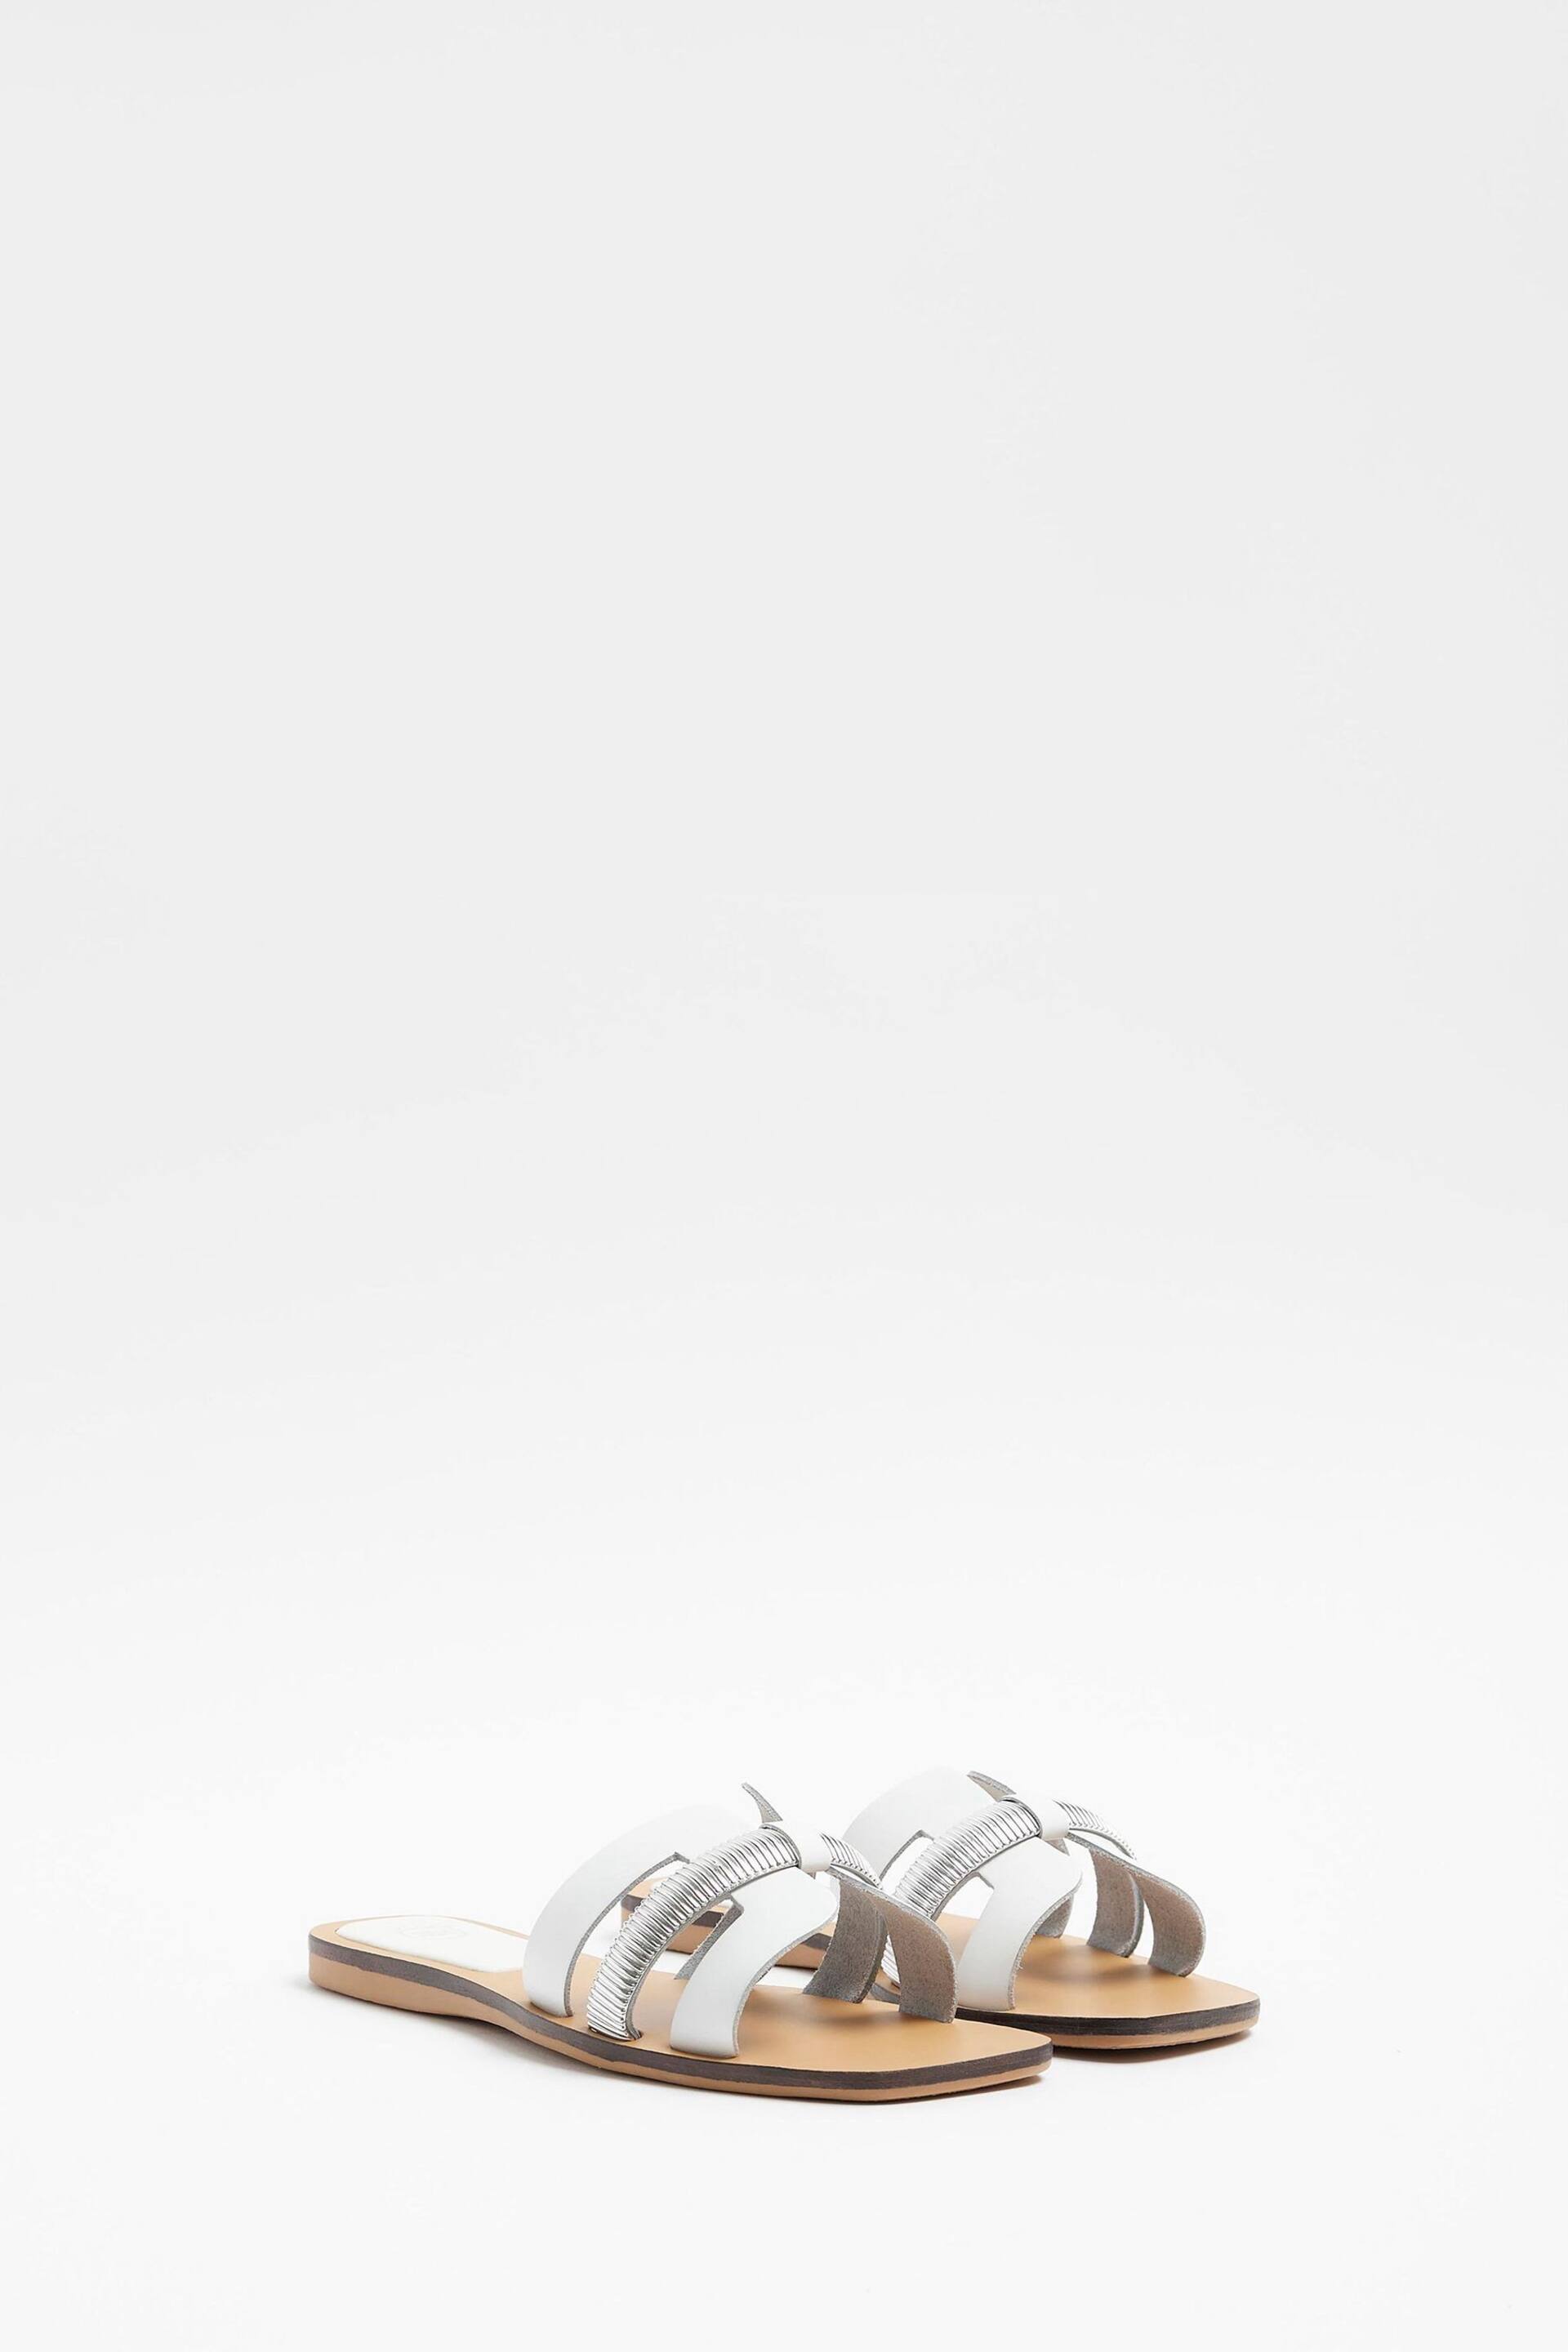 River Island White Cut-Out Strap Leather Sandals - Image 3 of 4